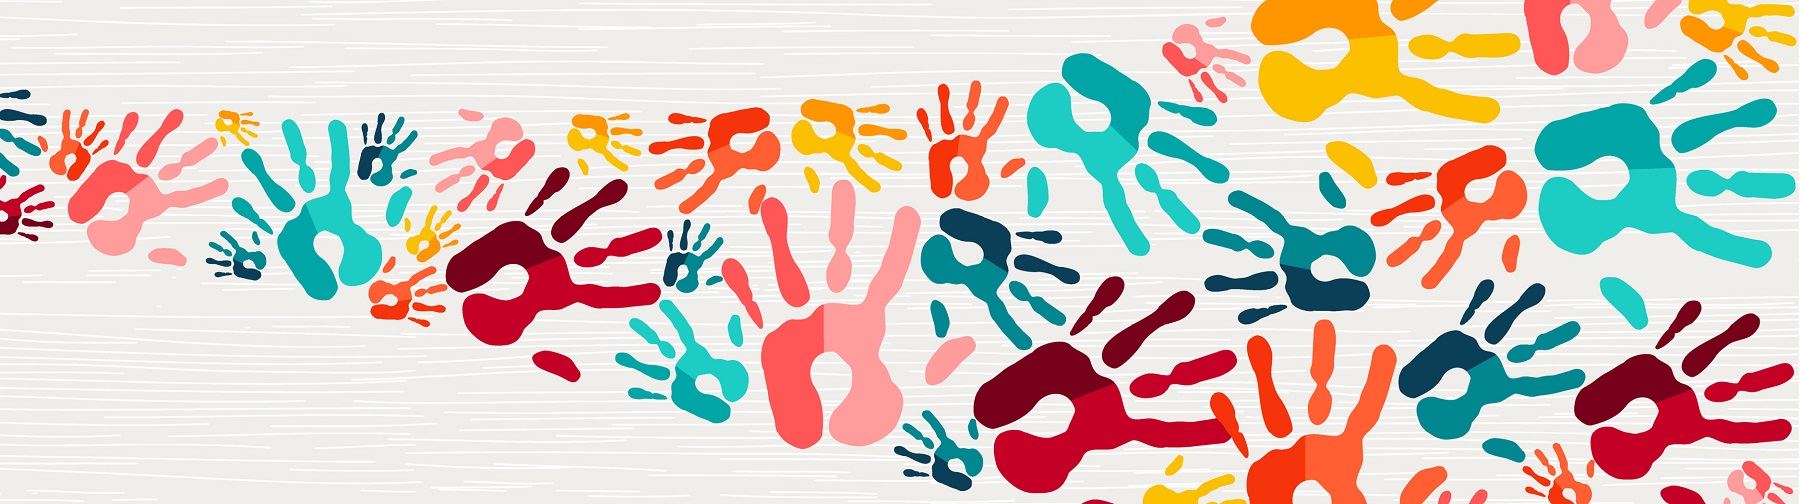 image featuring colorful handprints